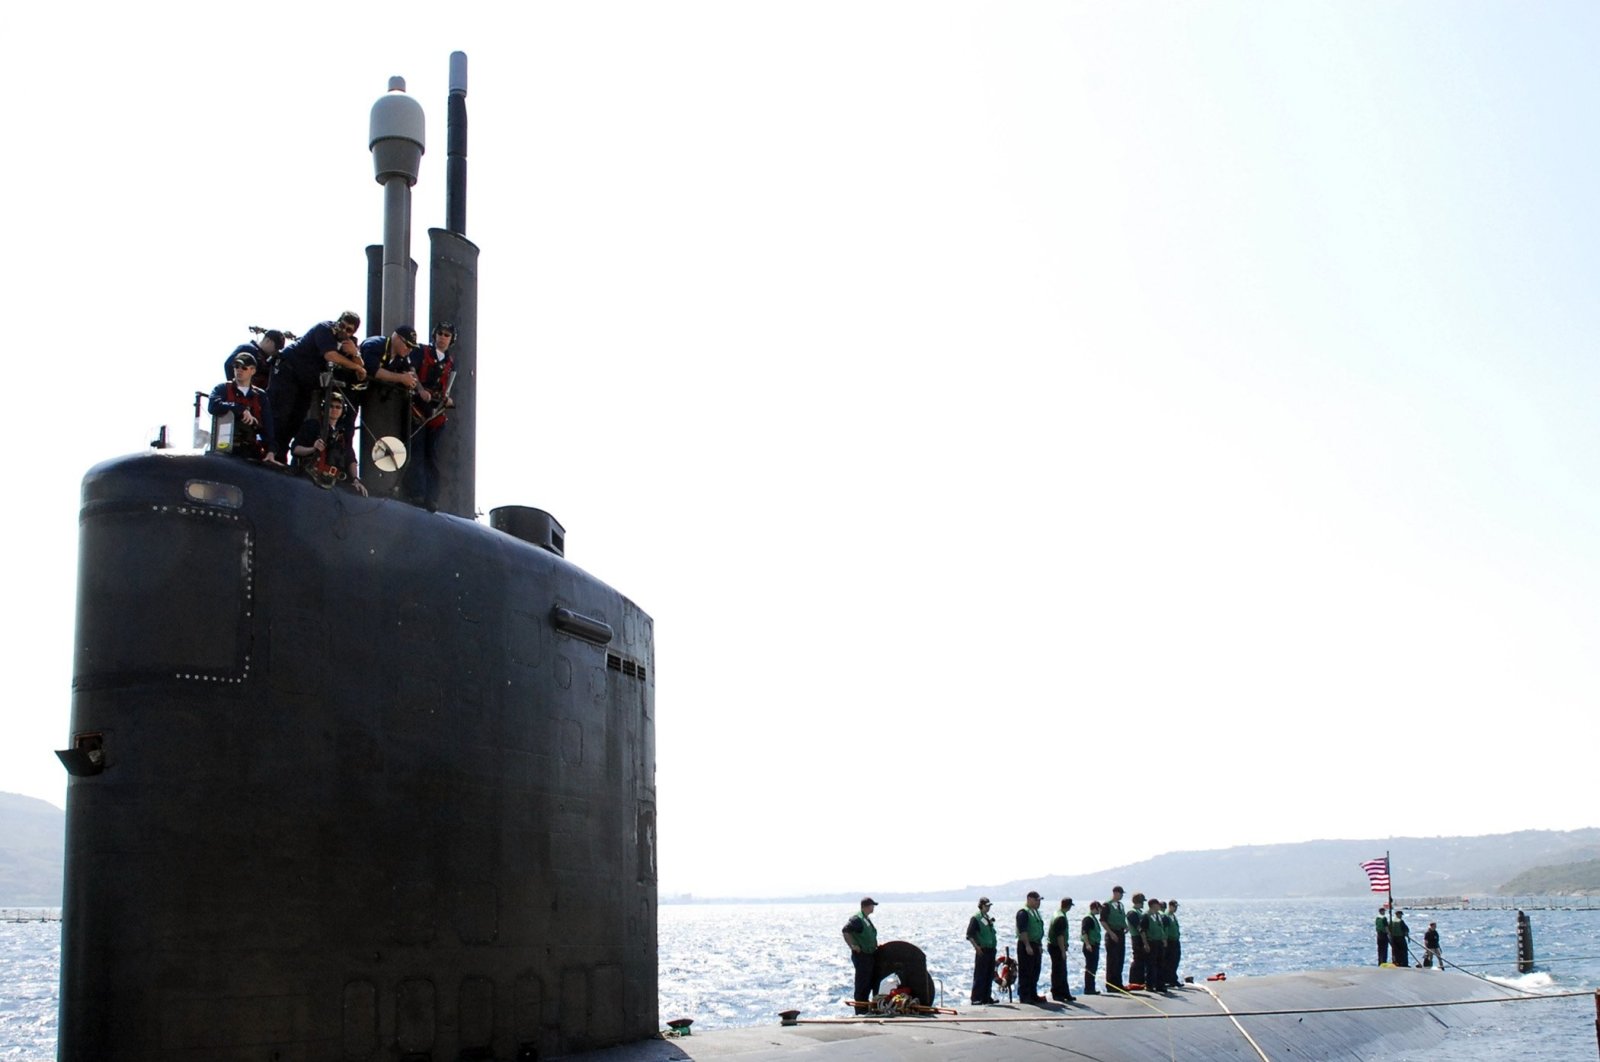 The USS San Juan arrives for a routine port visit in Souda Bay, Crete, Greece, May 22, 2007. (US Navy Handout, File)